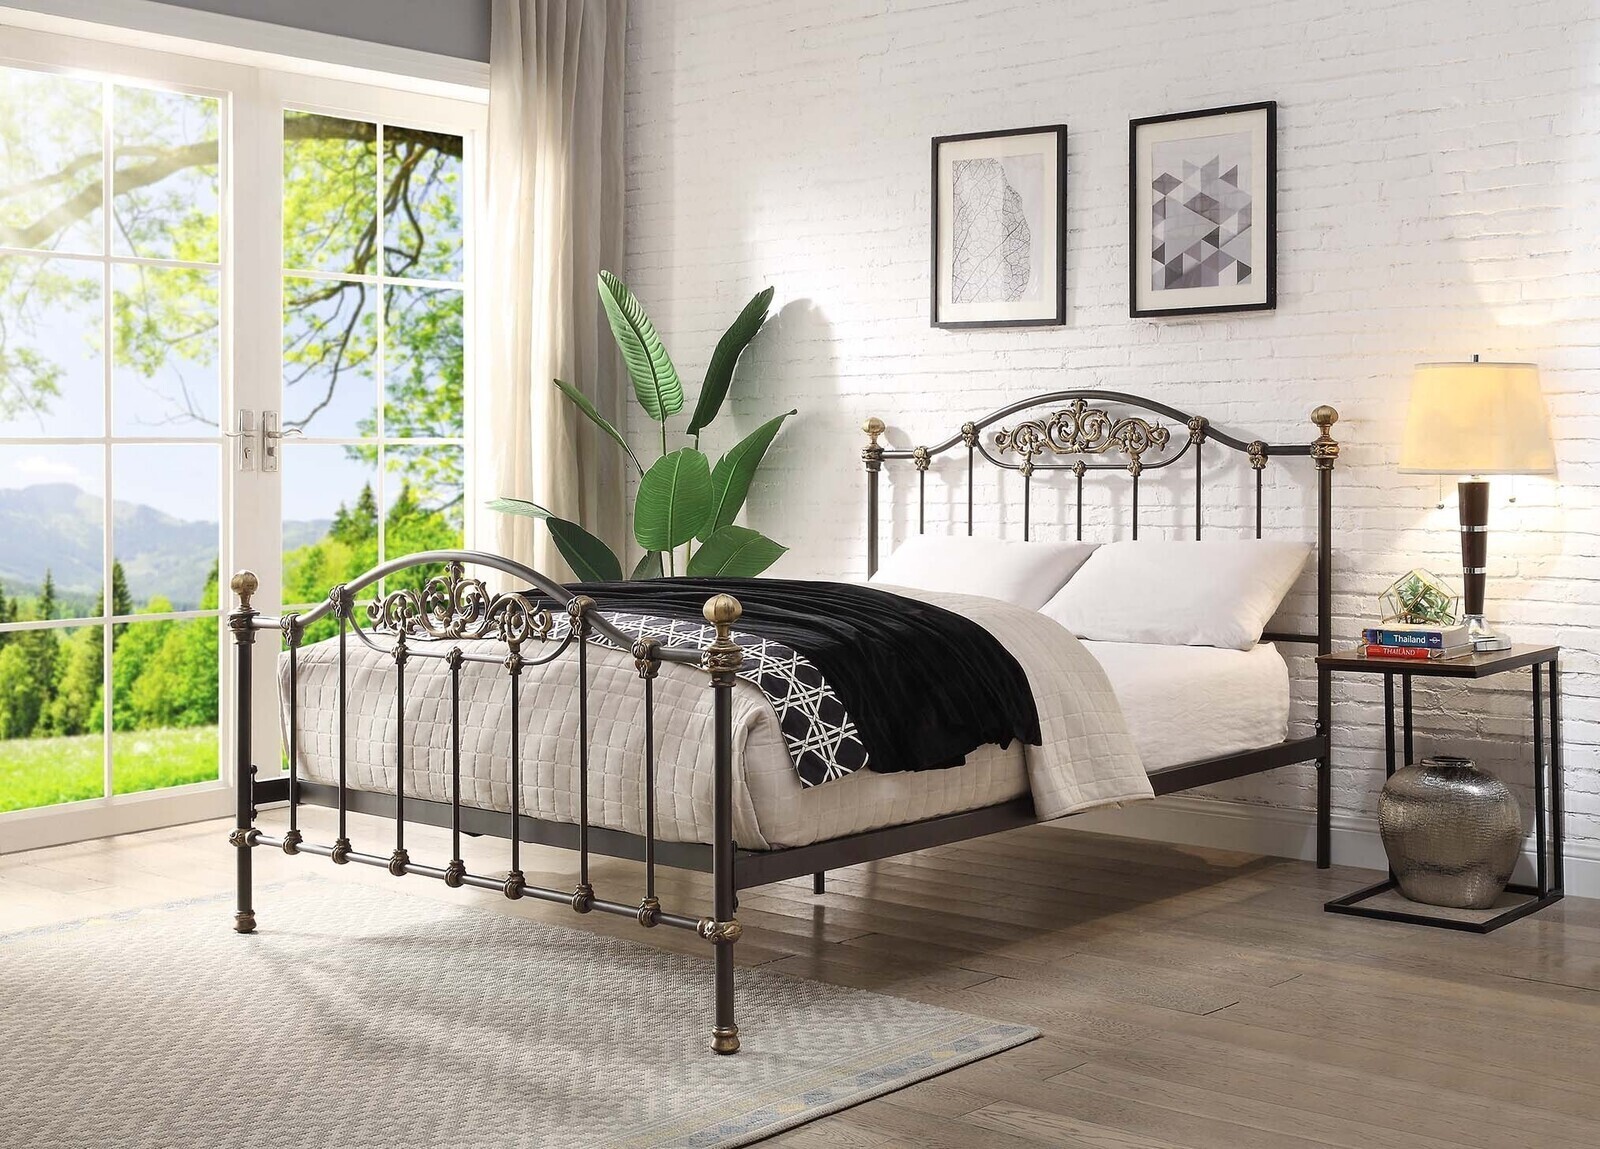 Wentworth Cast and Wrought Iron Bed - Queen Bed